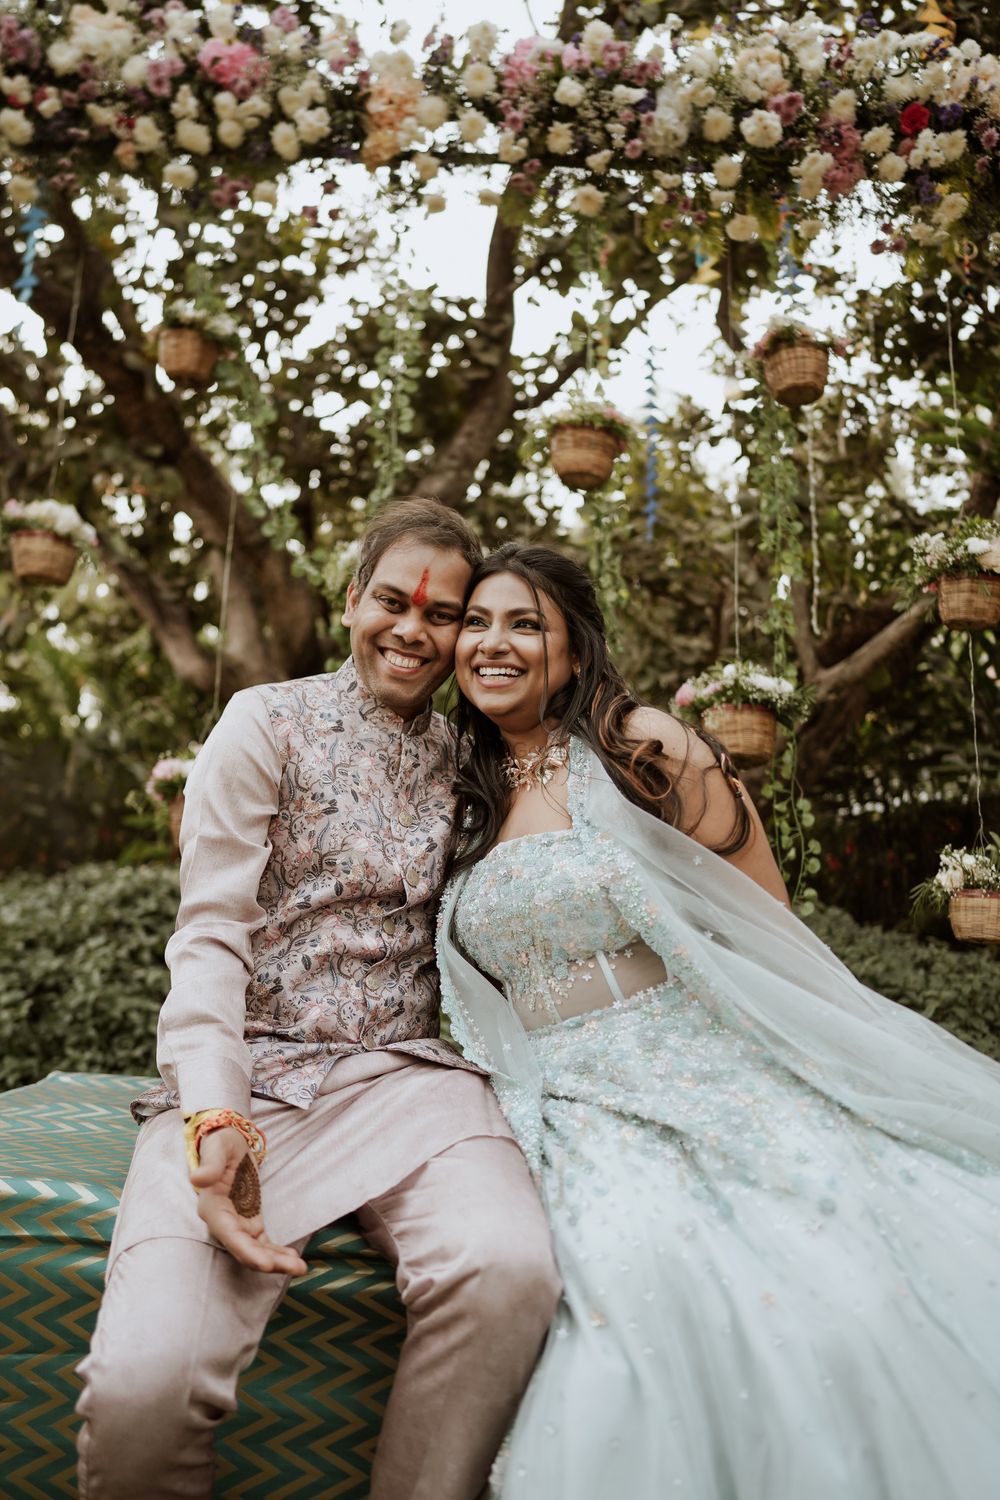 Photo From Shobith & Pooja - By The Wedmaker